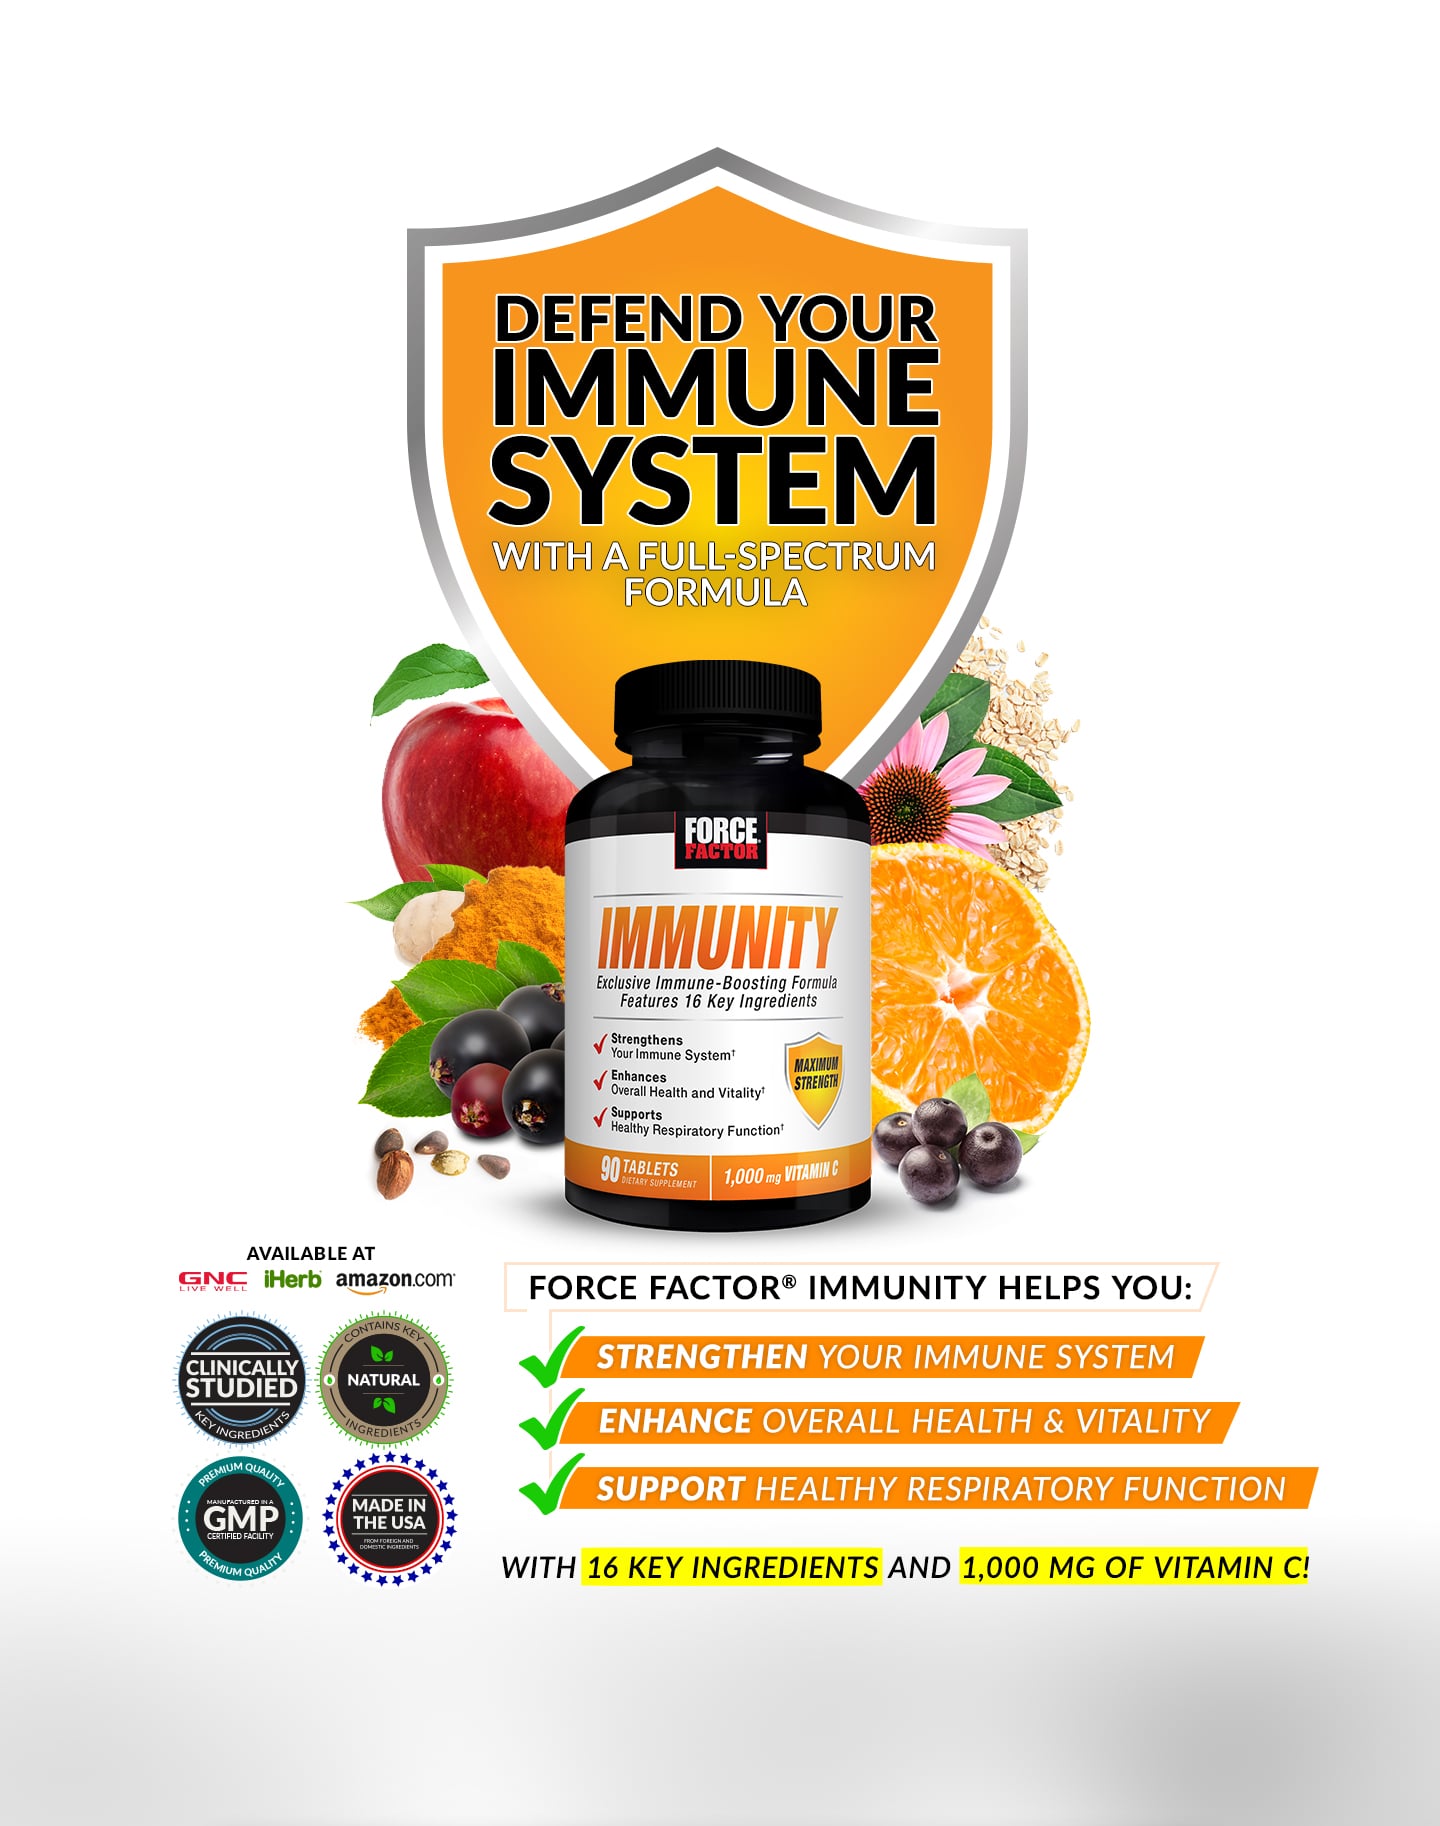 DEFEND YOUR IMMUNE SYSTEM WITH A FULL-SPECTRUM FORMULA. FORCE FACTOR® IMMUNITY HELPS YOU: STRENGHTEN YOUR IMMUNE SYSTEM, ENHANCE OVERALL HEALTH AND VITALITY, SUPPORT HEALTHY RESPIRATORY FUNCTION. WITH 16 KEY INGREDIENTS AND 1,000 MG OF VITAMIN C!